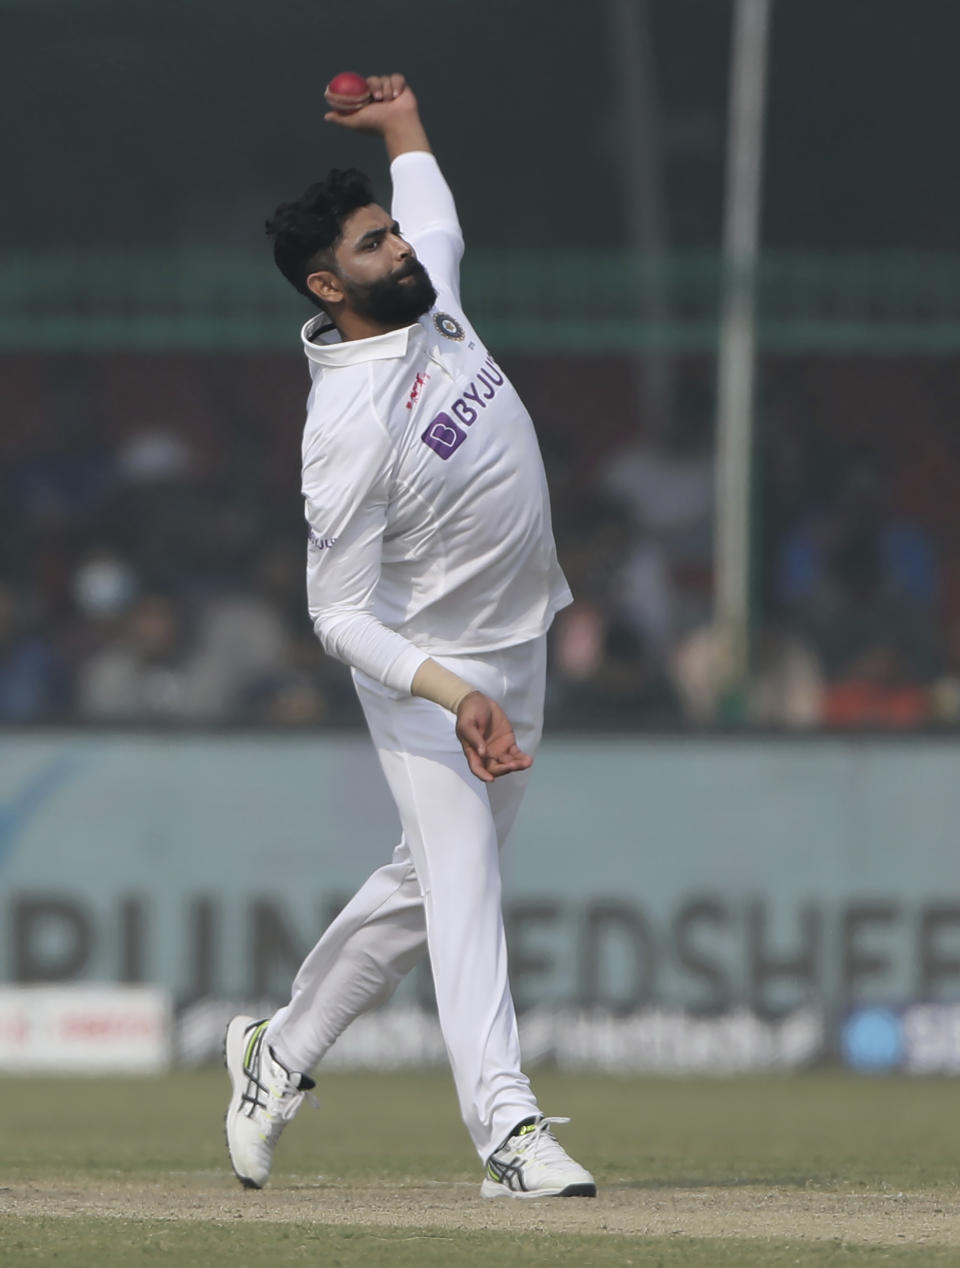 India's Ravindra Jadeja bowls during the day three of their first test cricket match with New Zealand in Kanpur, India, Saturday, Nov. 27, 2021. (AP Photo/Altaf Qadri)